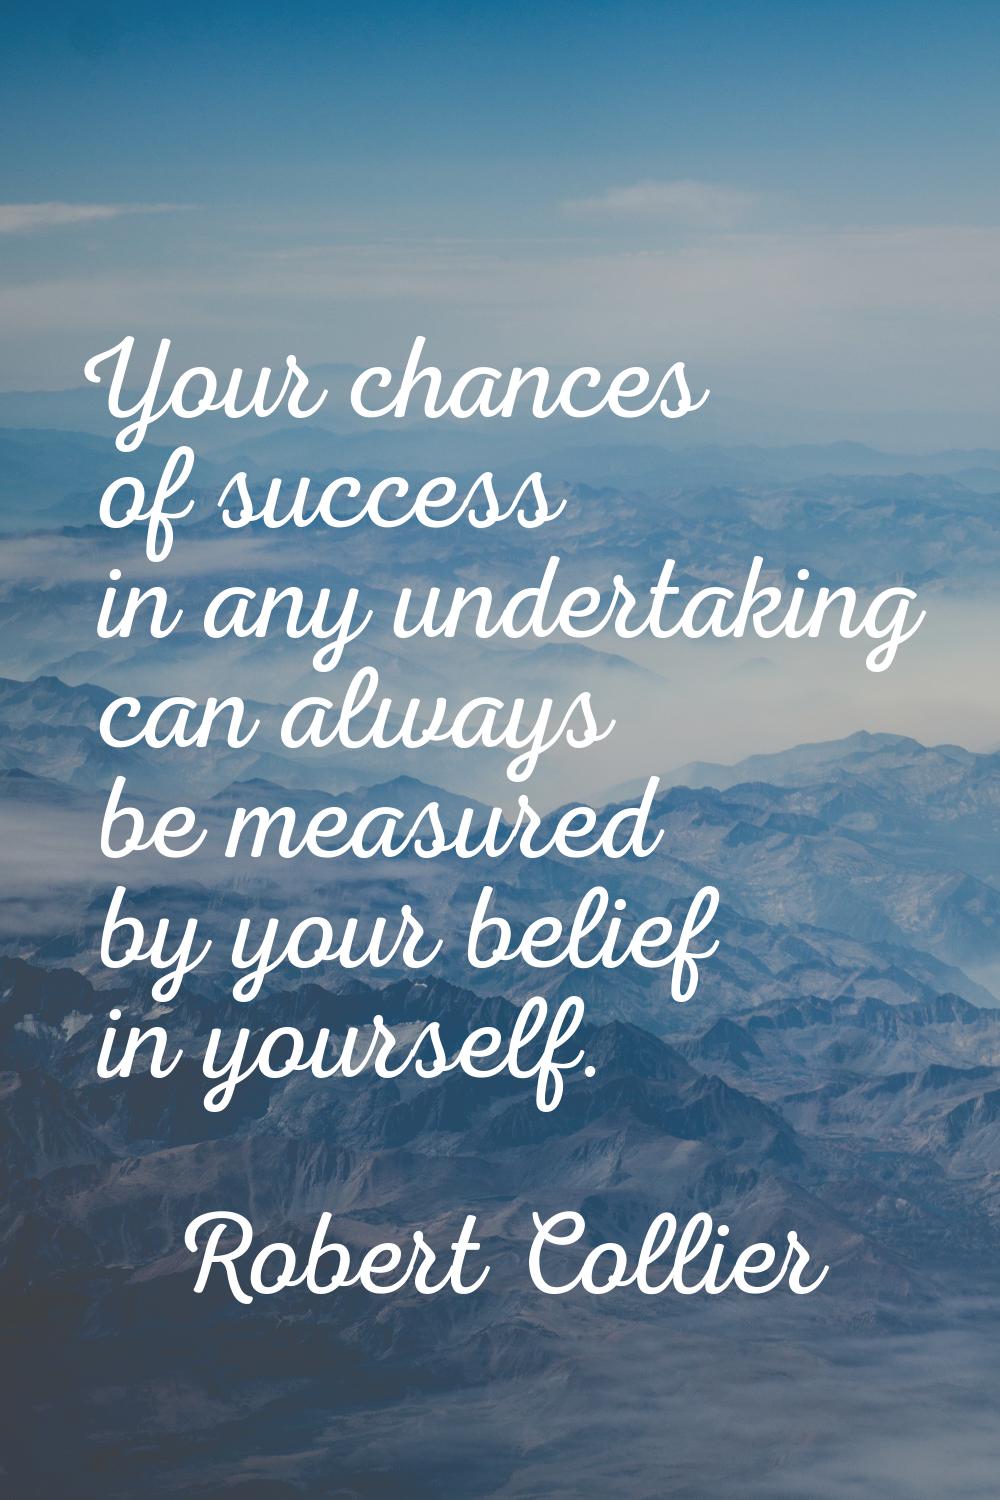 Your chances of success in any undertaking can always be measured by your belief in yourself.